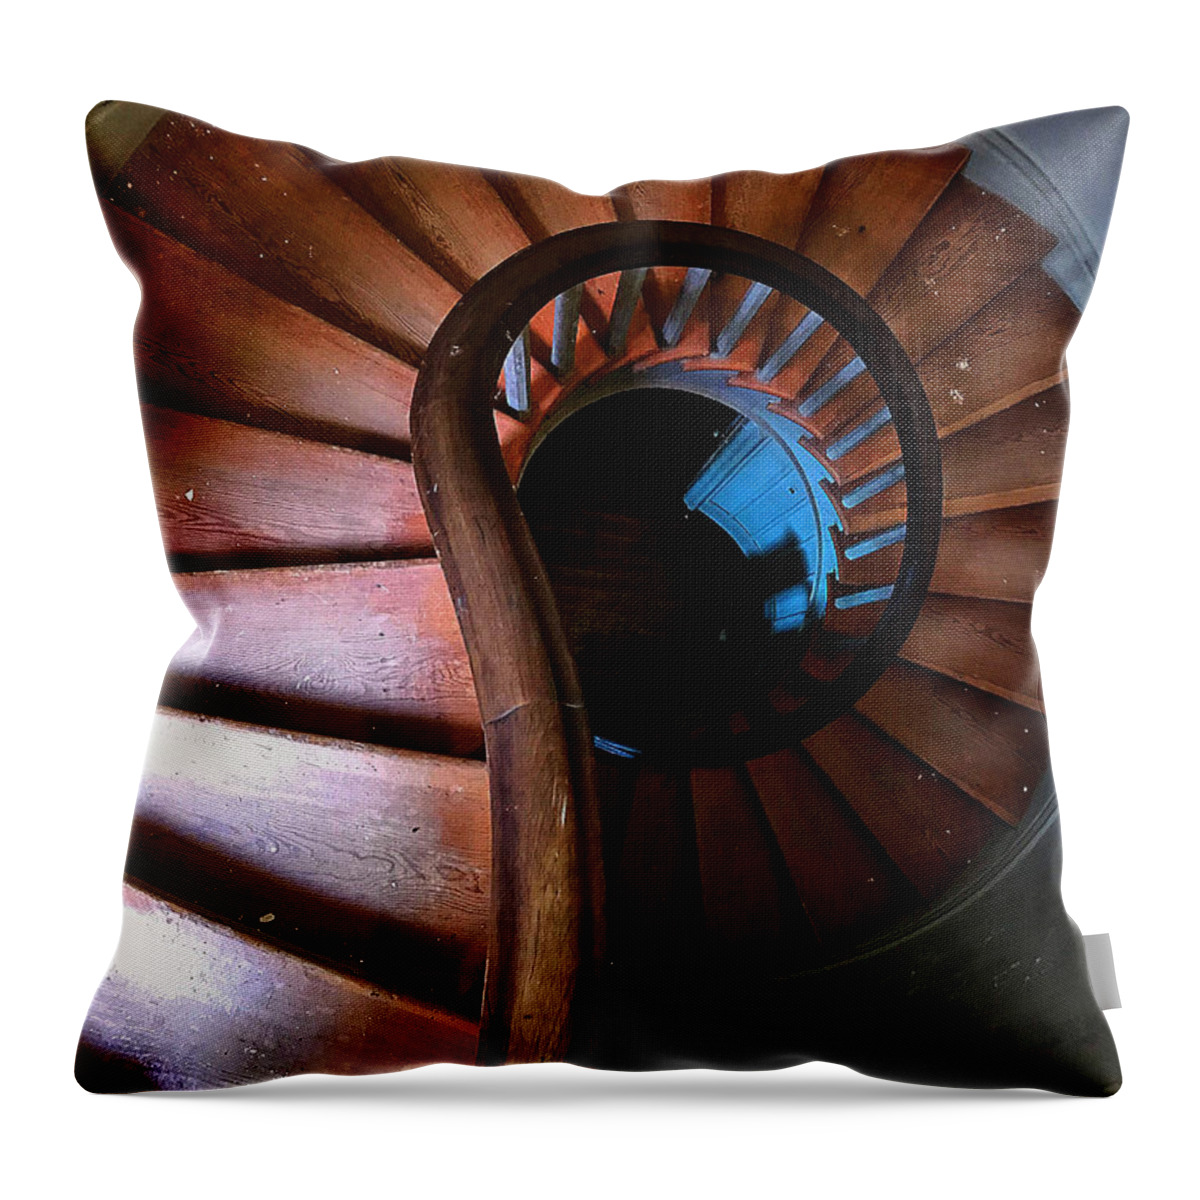  Throw Pillow featuring the photograph Stairway by Stephen Dorton